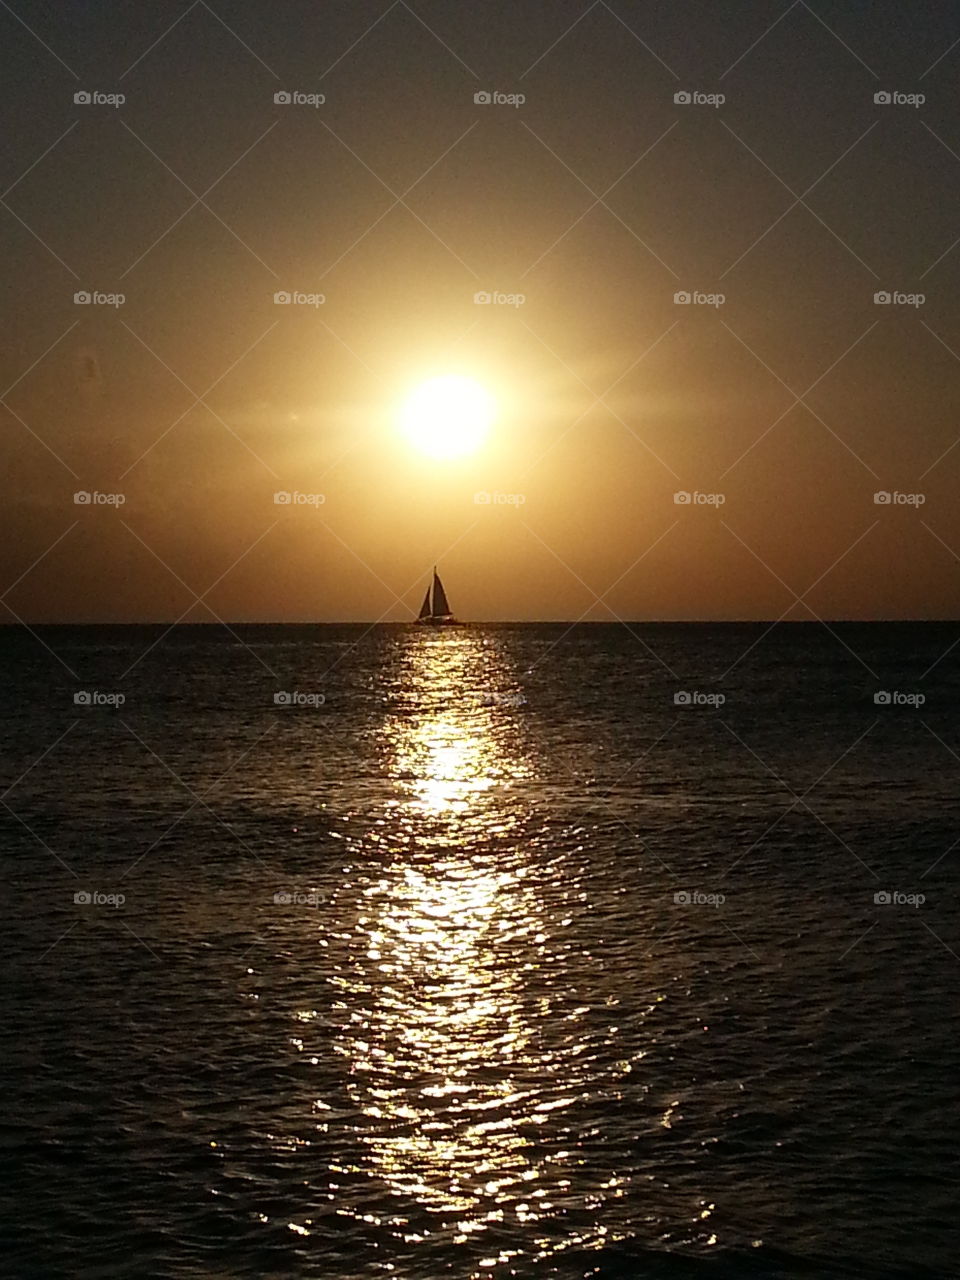 Sailing through Cayman Islands. Watching the Sunset while on vacation and captured this Beautiful Picture!